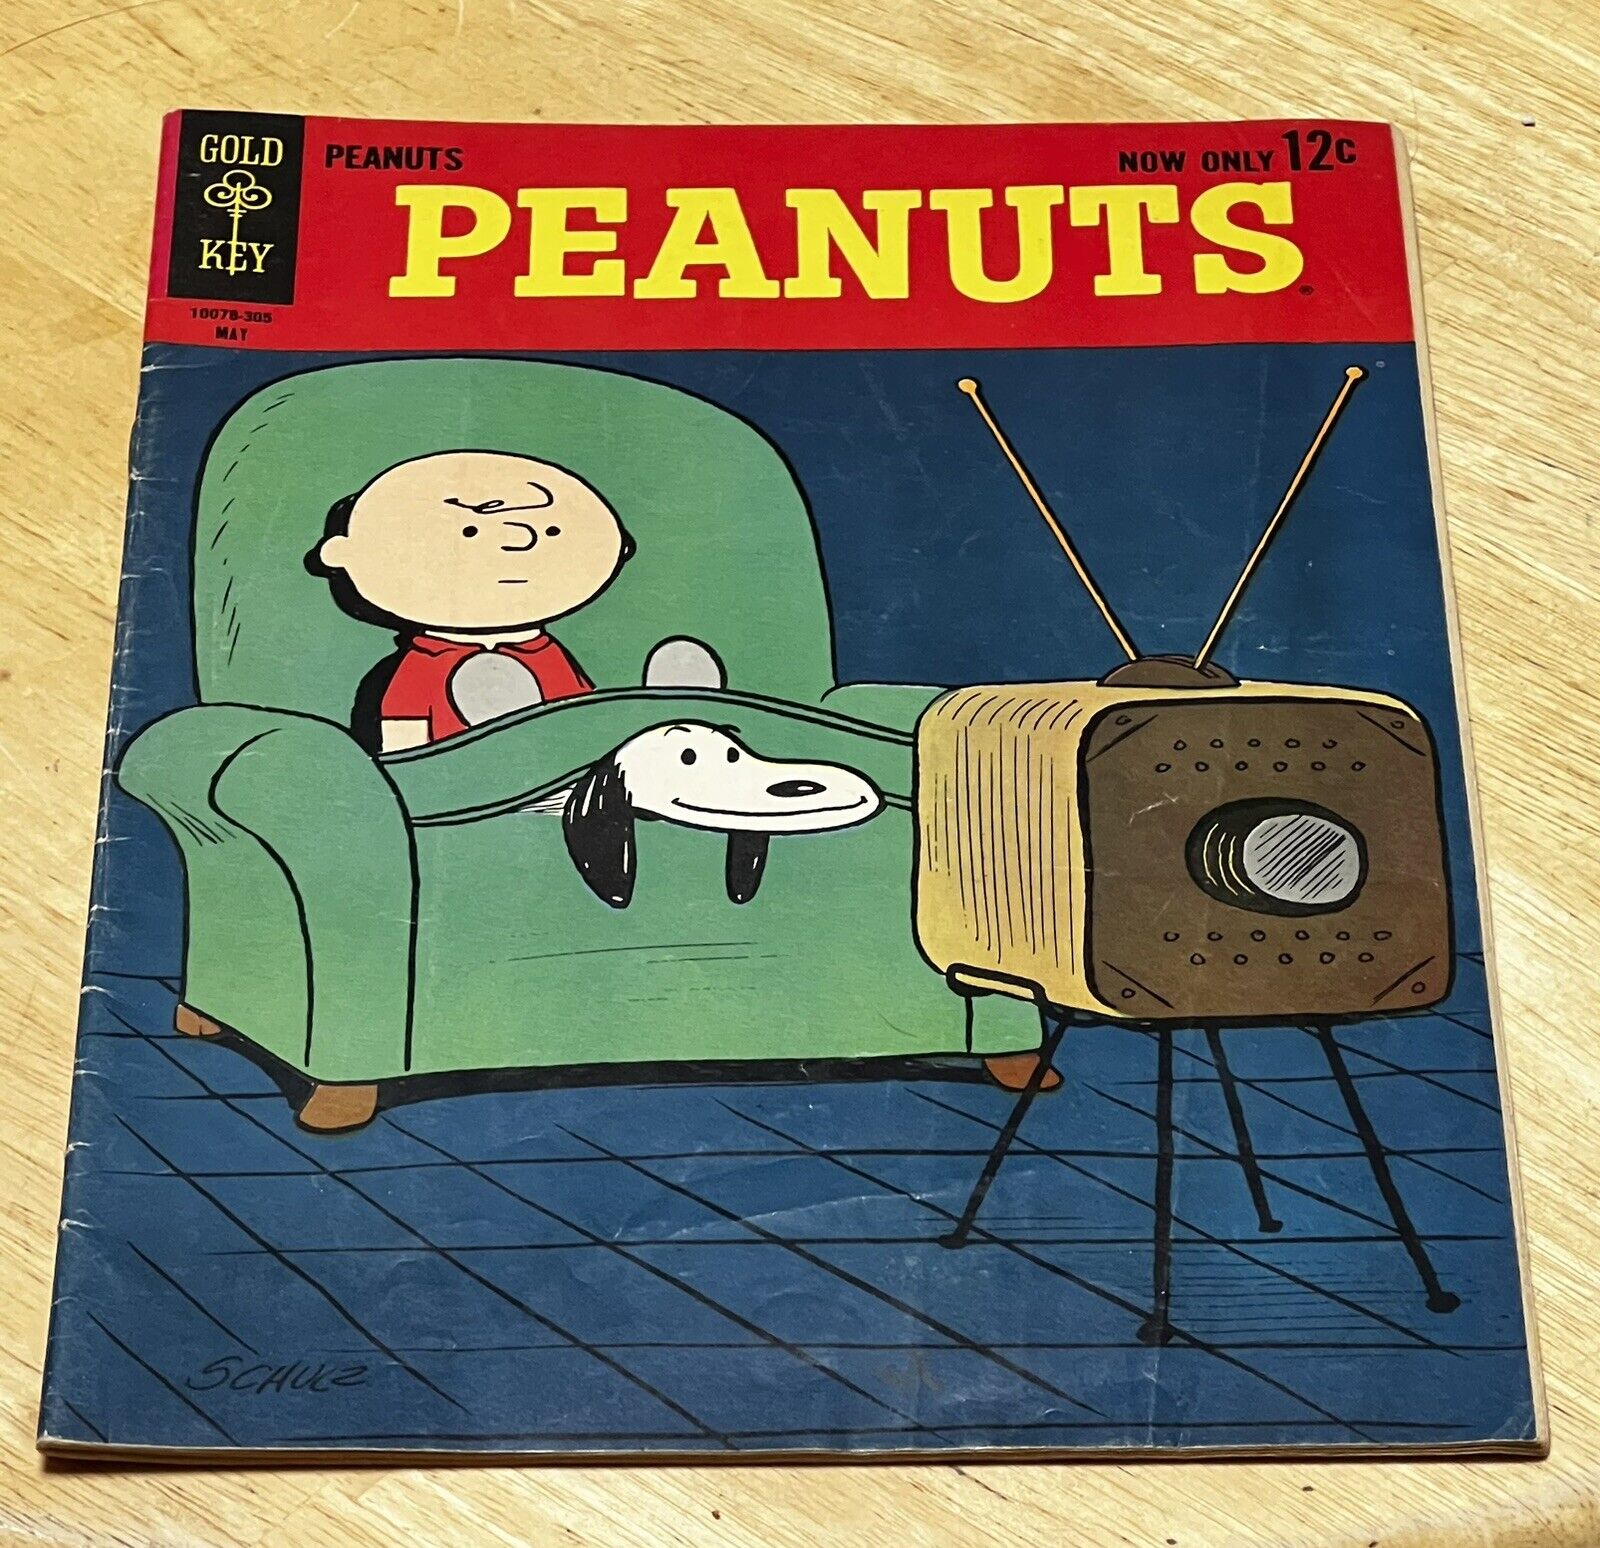 PEANUTS #1 1963-GOLD KEY-CHARLIE BROWN-SNOOPY-FIRST ISSUE